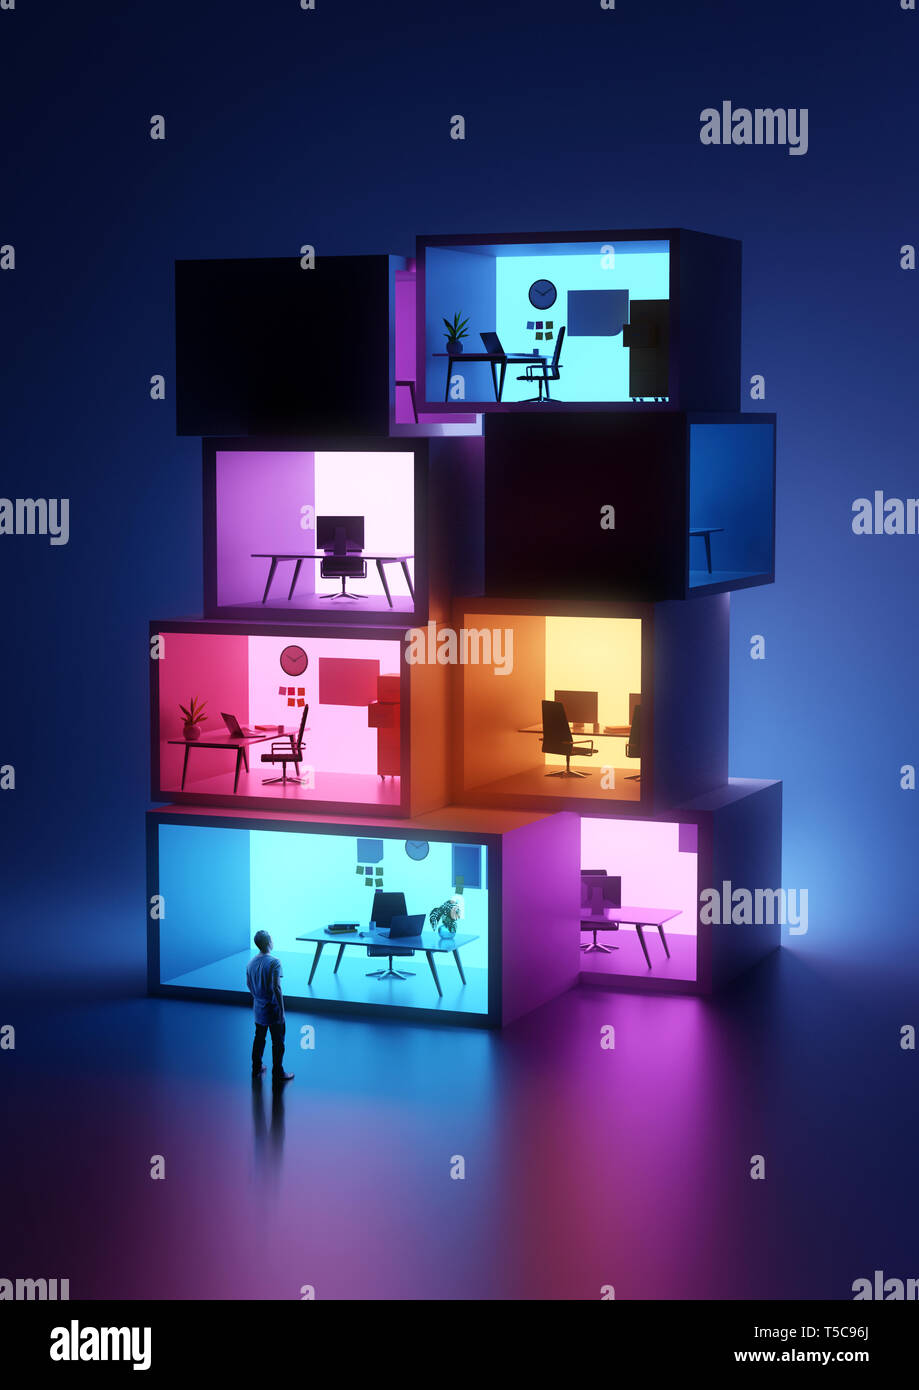 stacked glowing office rooms. Business workplace and co-working jobs concept. 3D illustration. Stock Photo